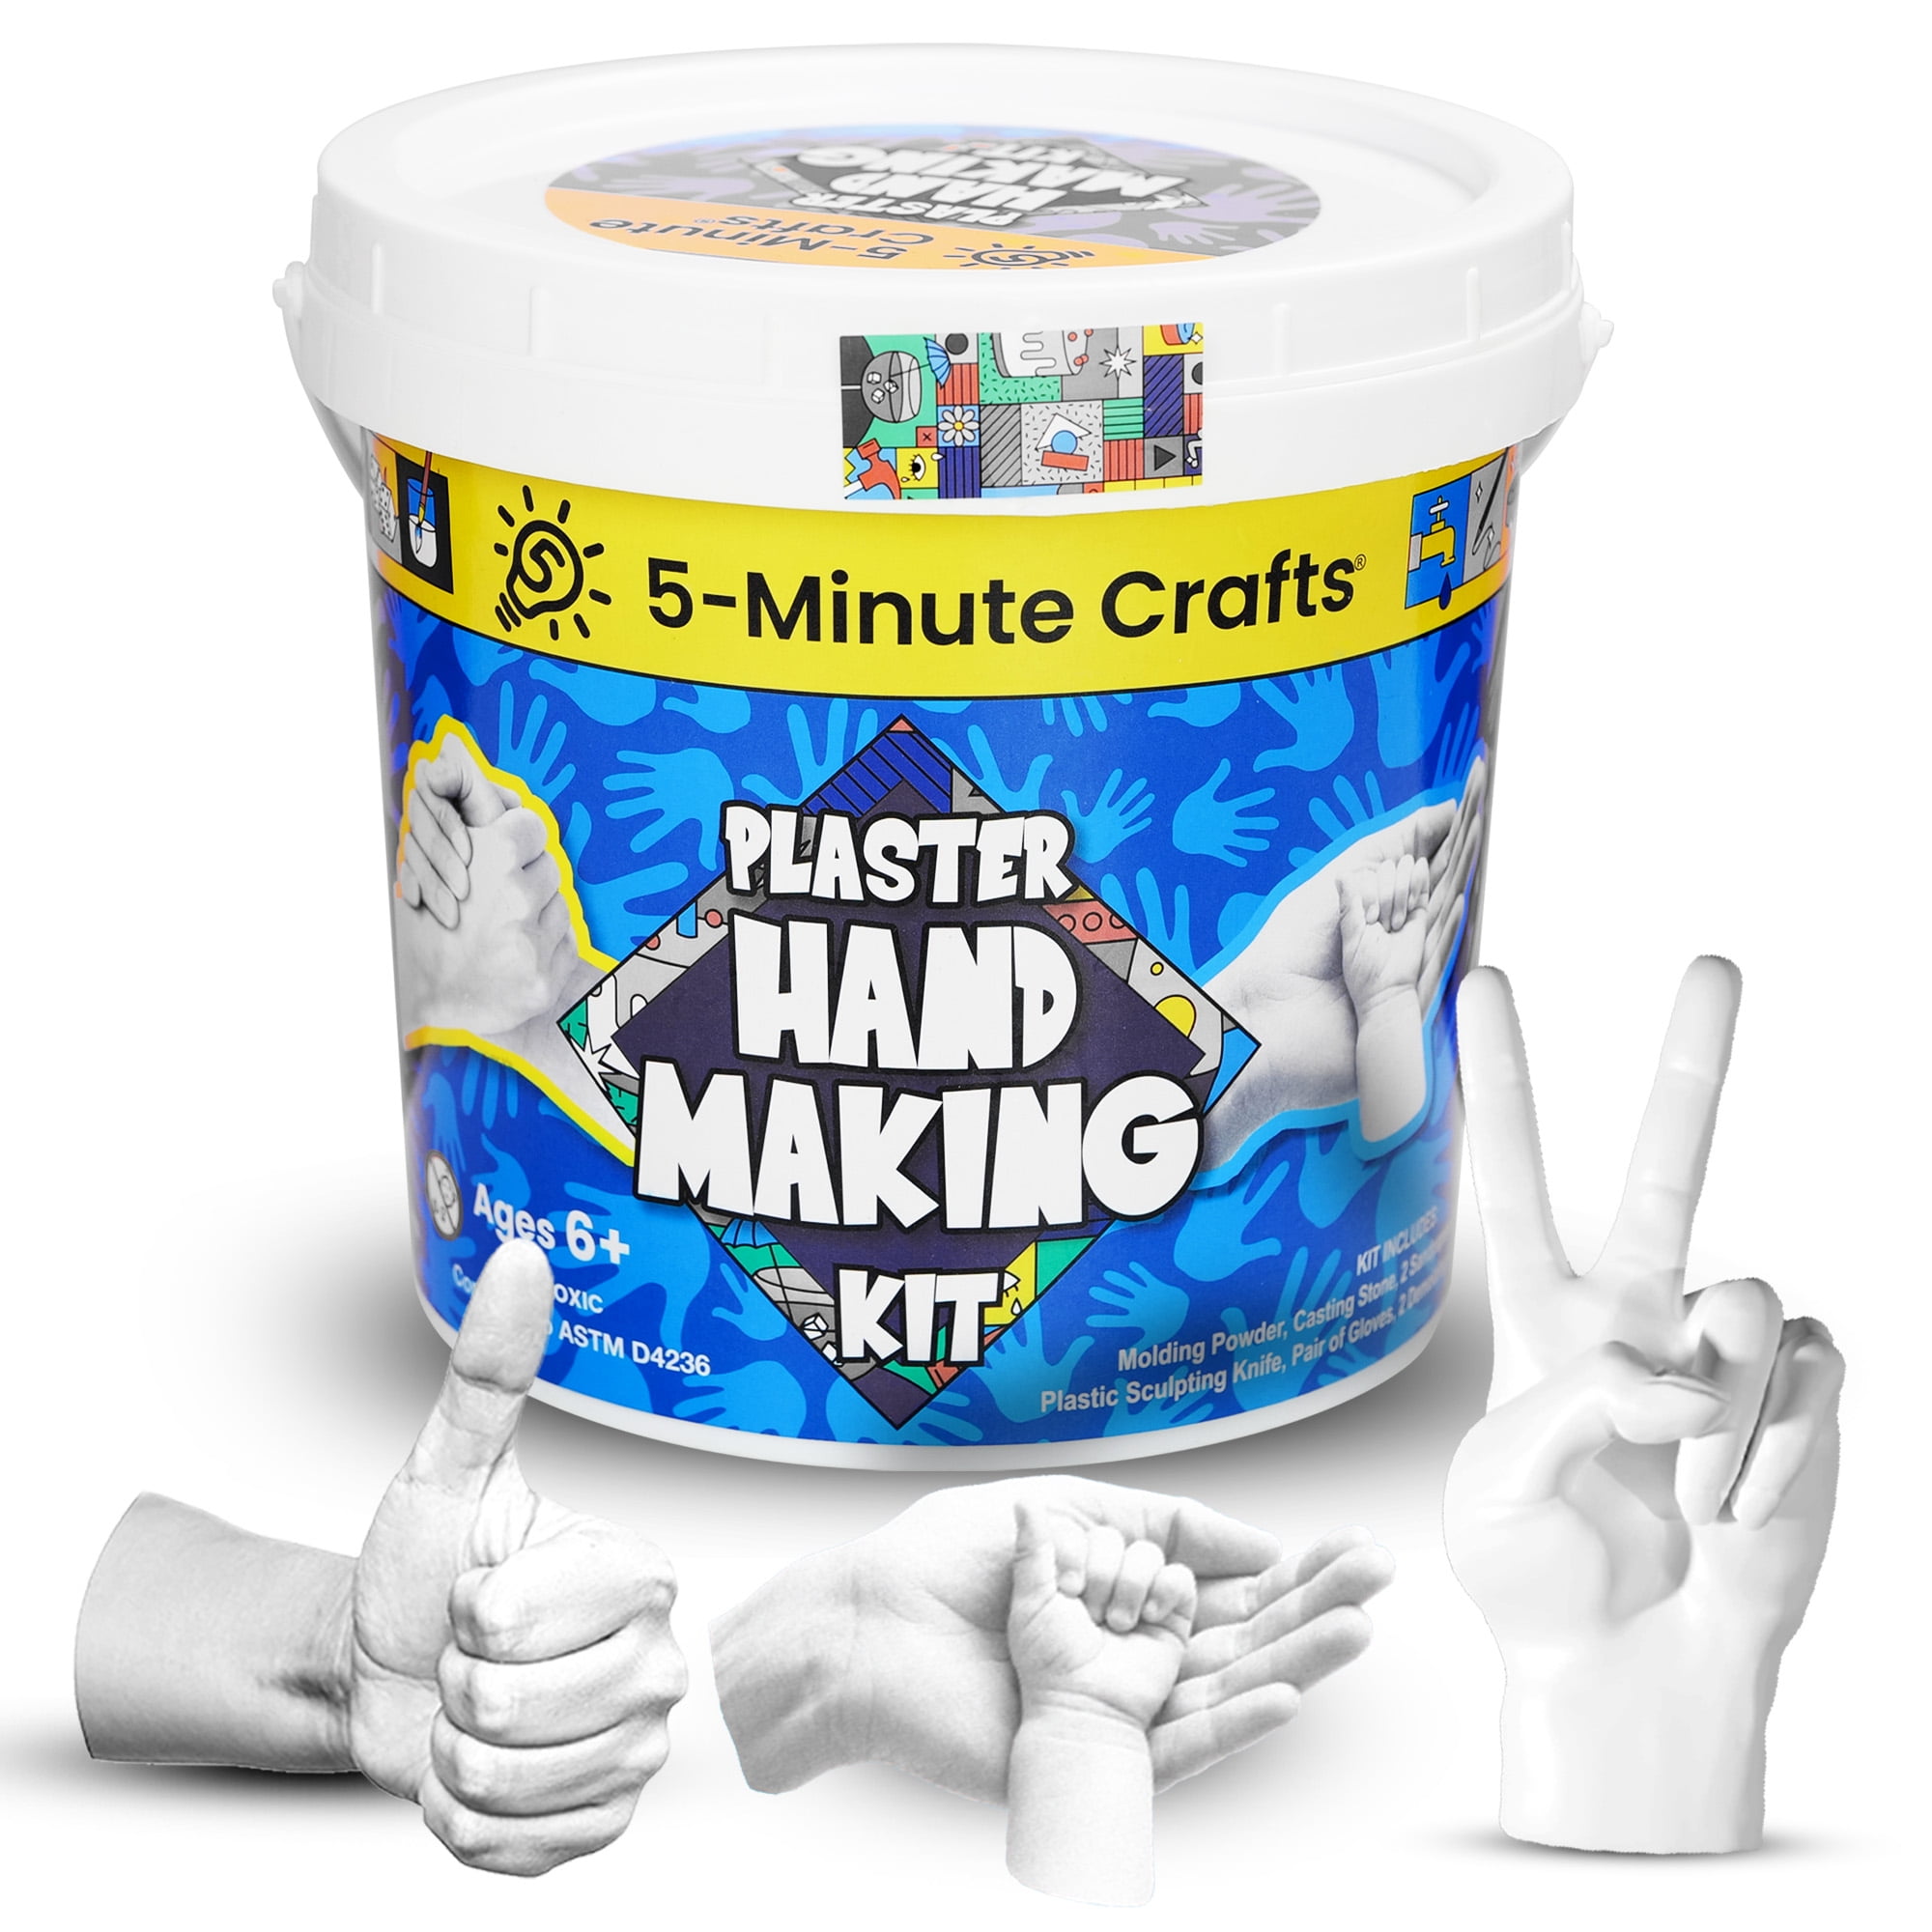 Hand Casting Kit Couples - Plaster Hand Mold Casting Kit, DIY Kits for  Adults and Kids, Wedding Gifts for Couple, Hand Mold Kit Couples Gifts for  Her, Birthday Gifts for Mom